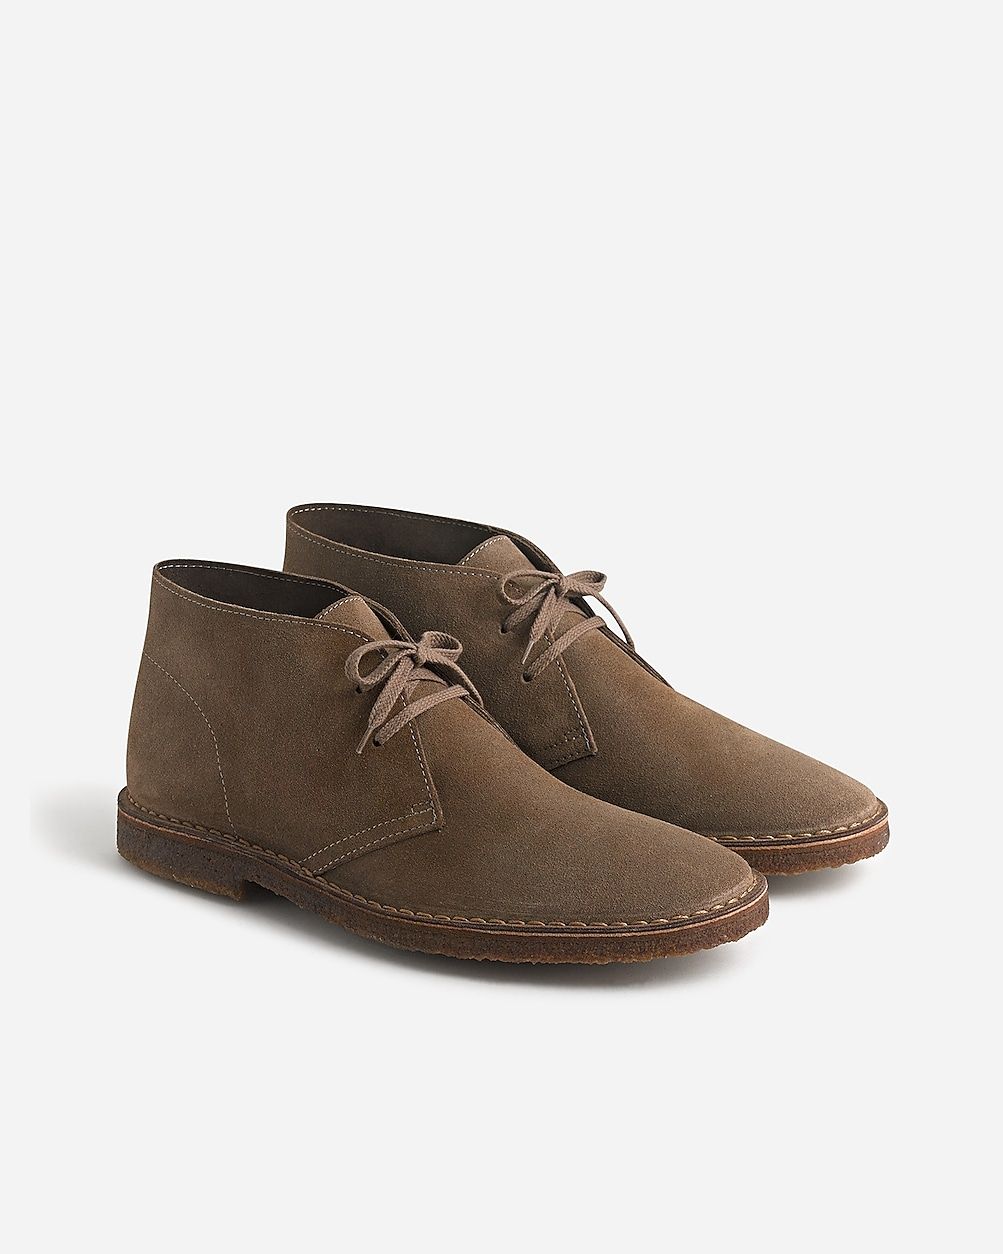 Adults' 1990 MacAlister boots in suede | J.Crew US